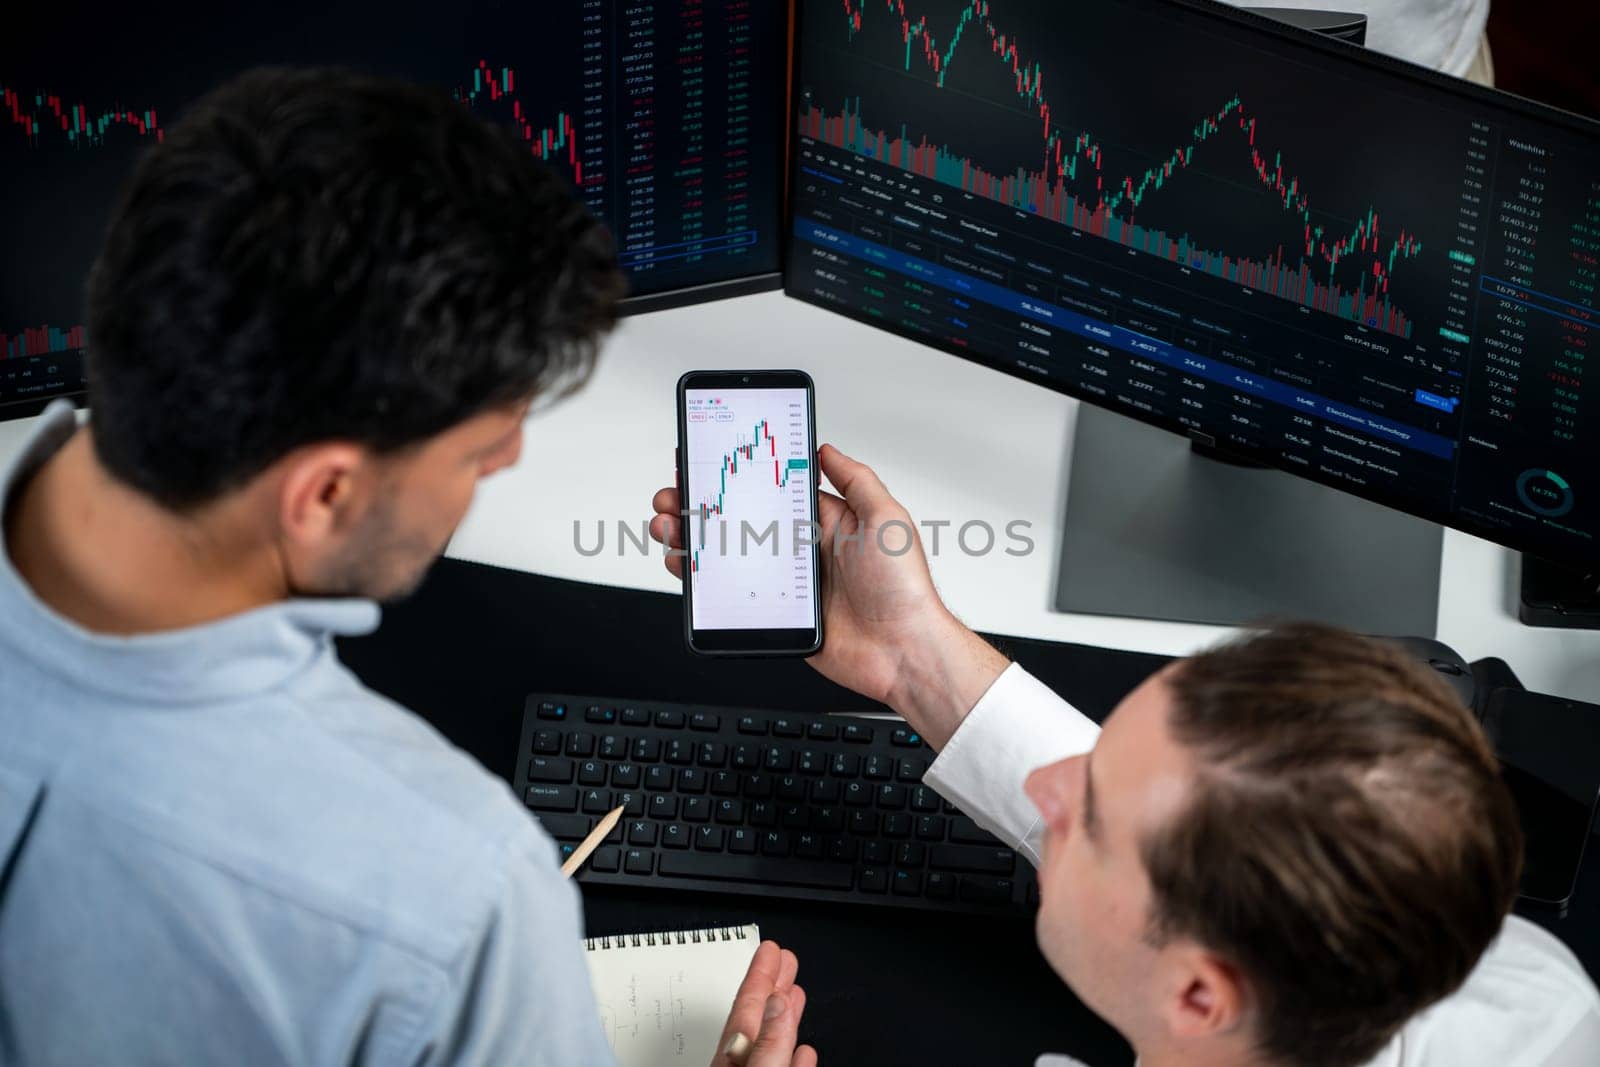 Investor stock officer focusing on dynamic exchange rate database on smartphone, comparing with market dynamic graph with monitor screen. Concept of analysis trading technology investment. Sellable.